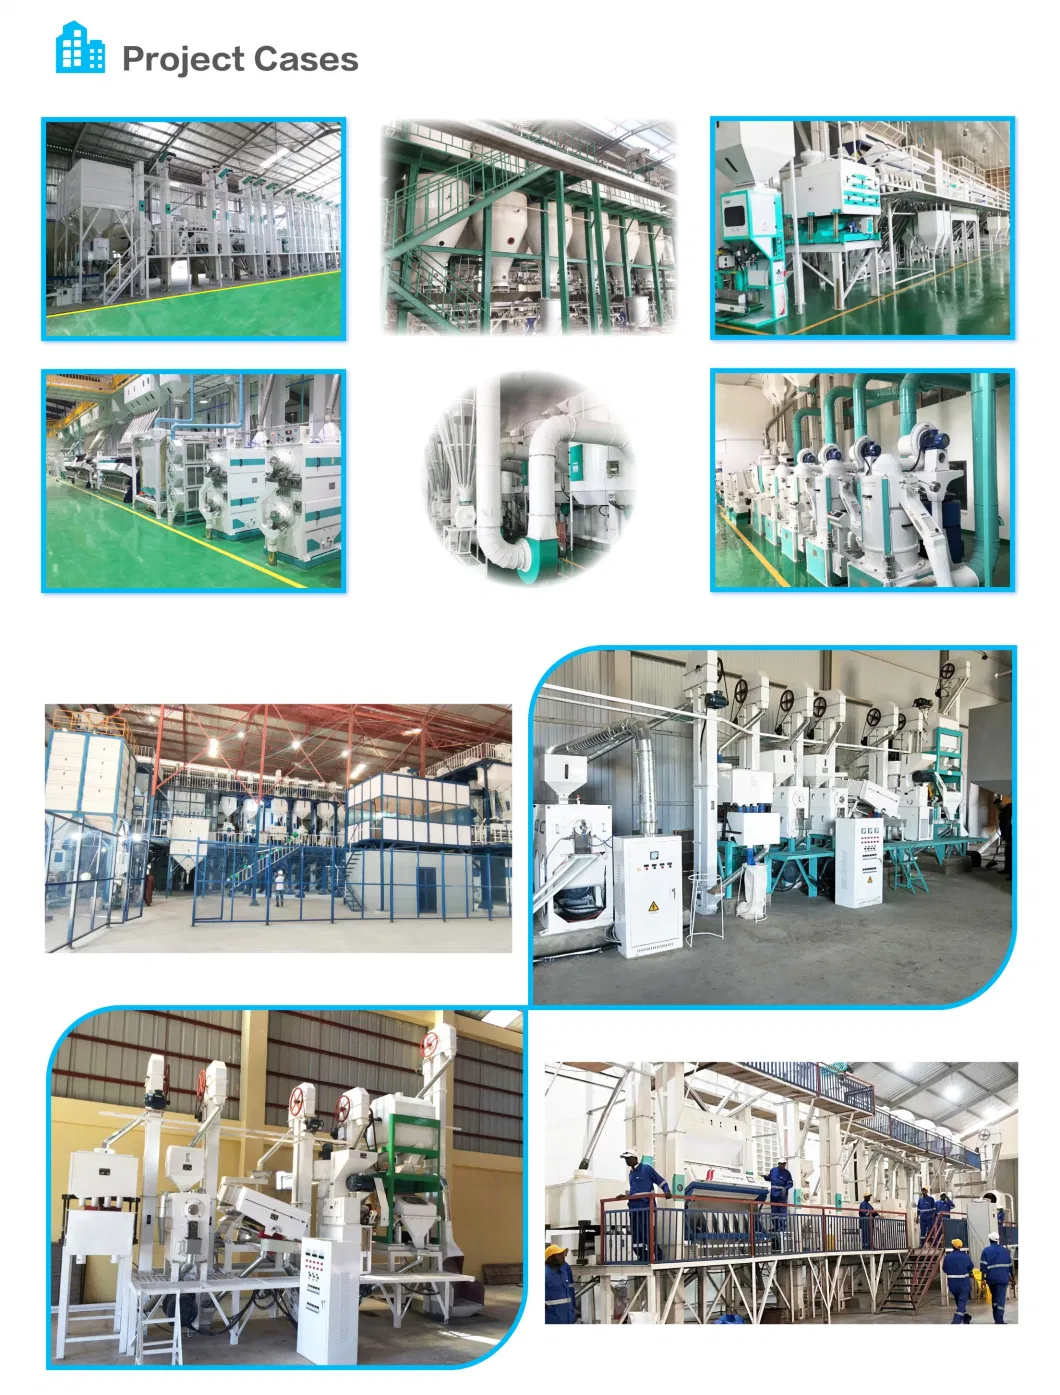 OEM/ODM Grain Processing Machinery 50tpd Integration Rice Mill Unit Rice Milling Machine